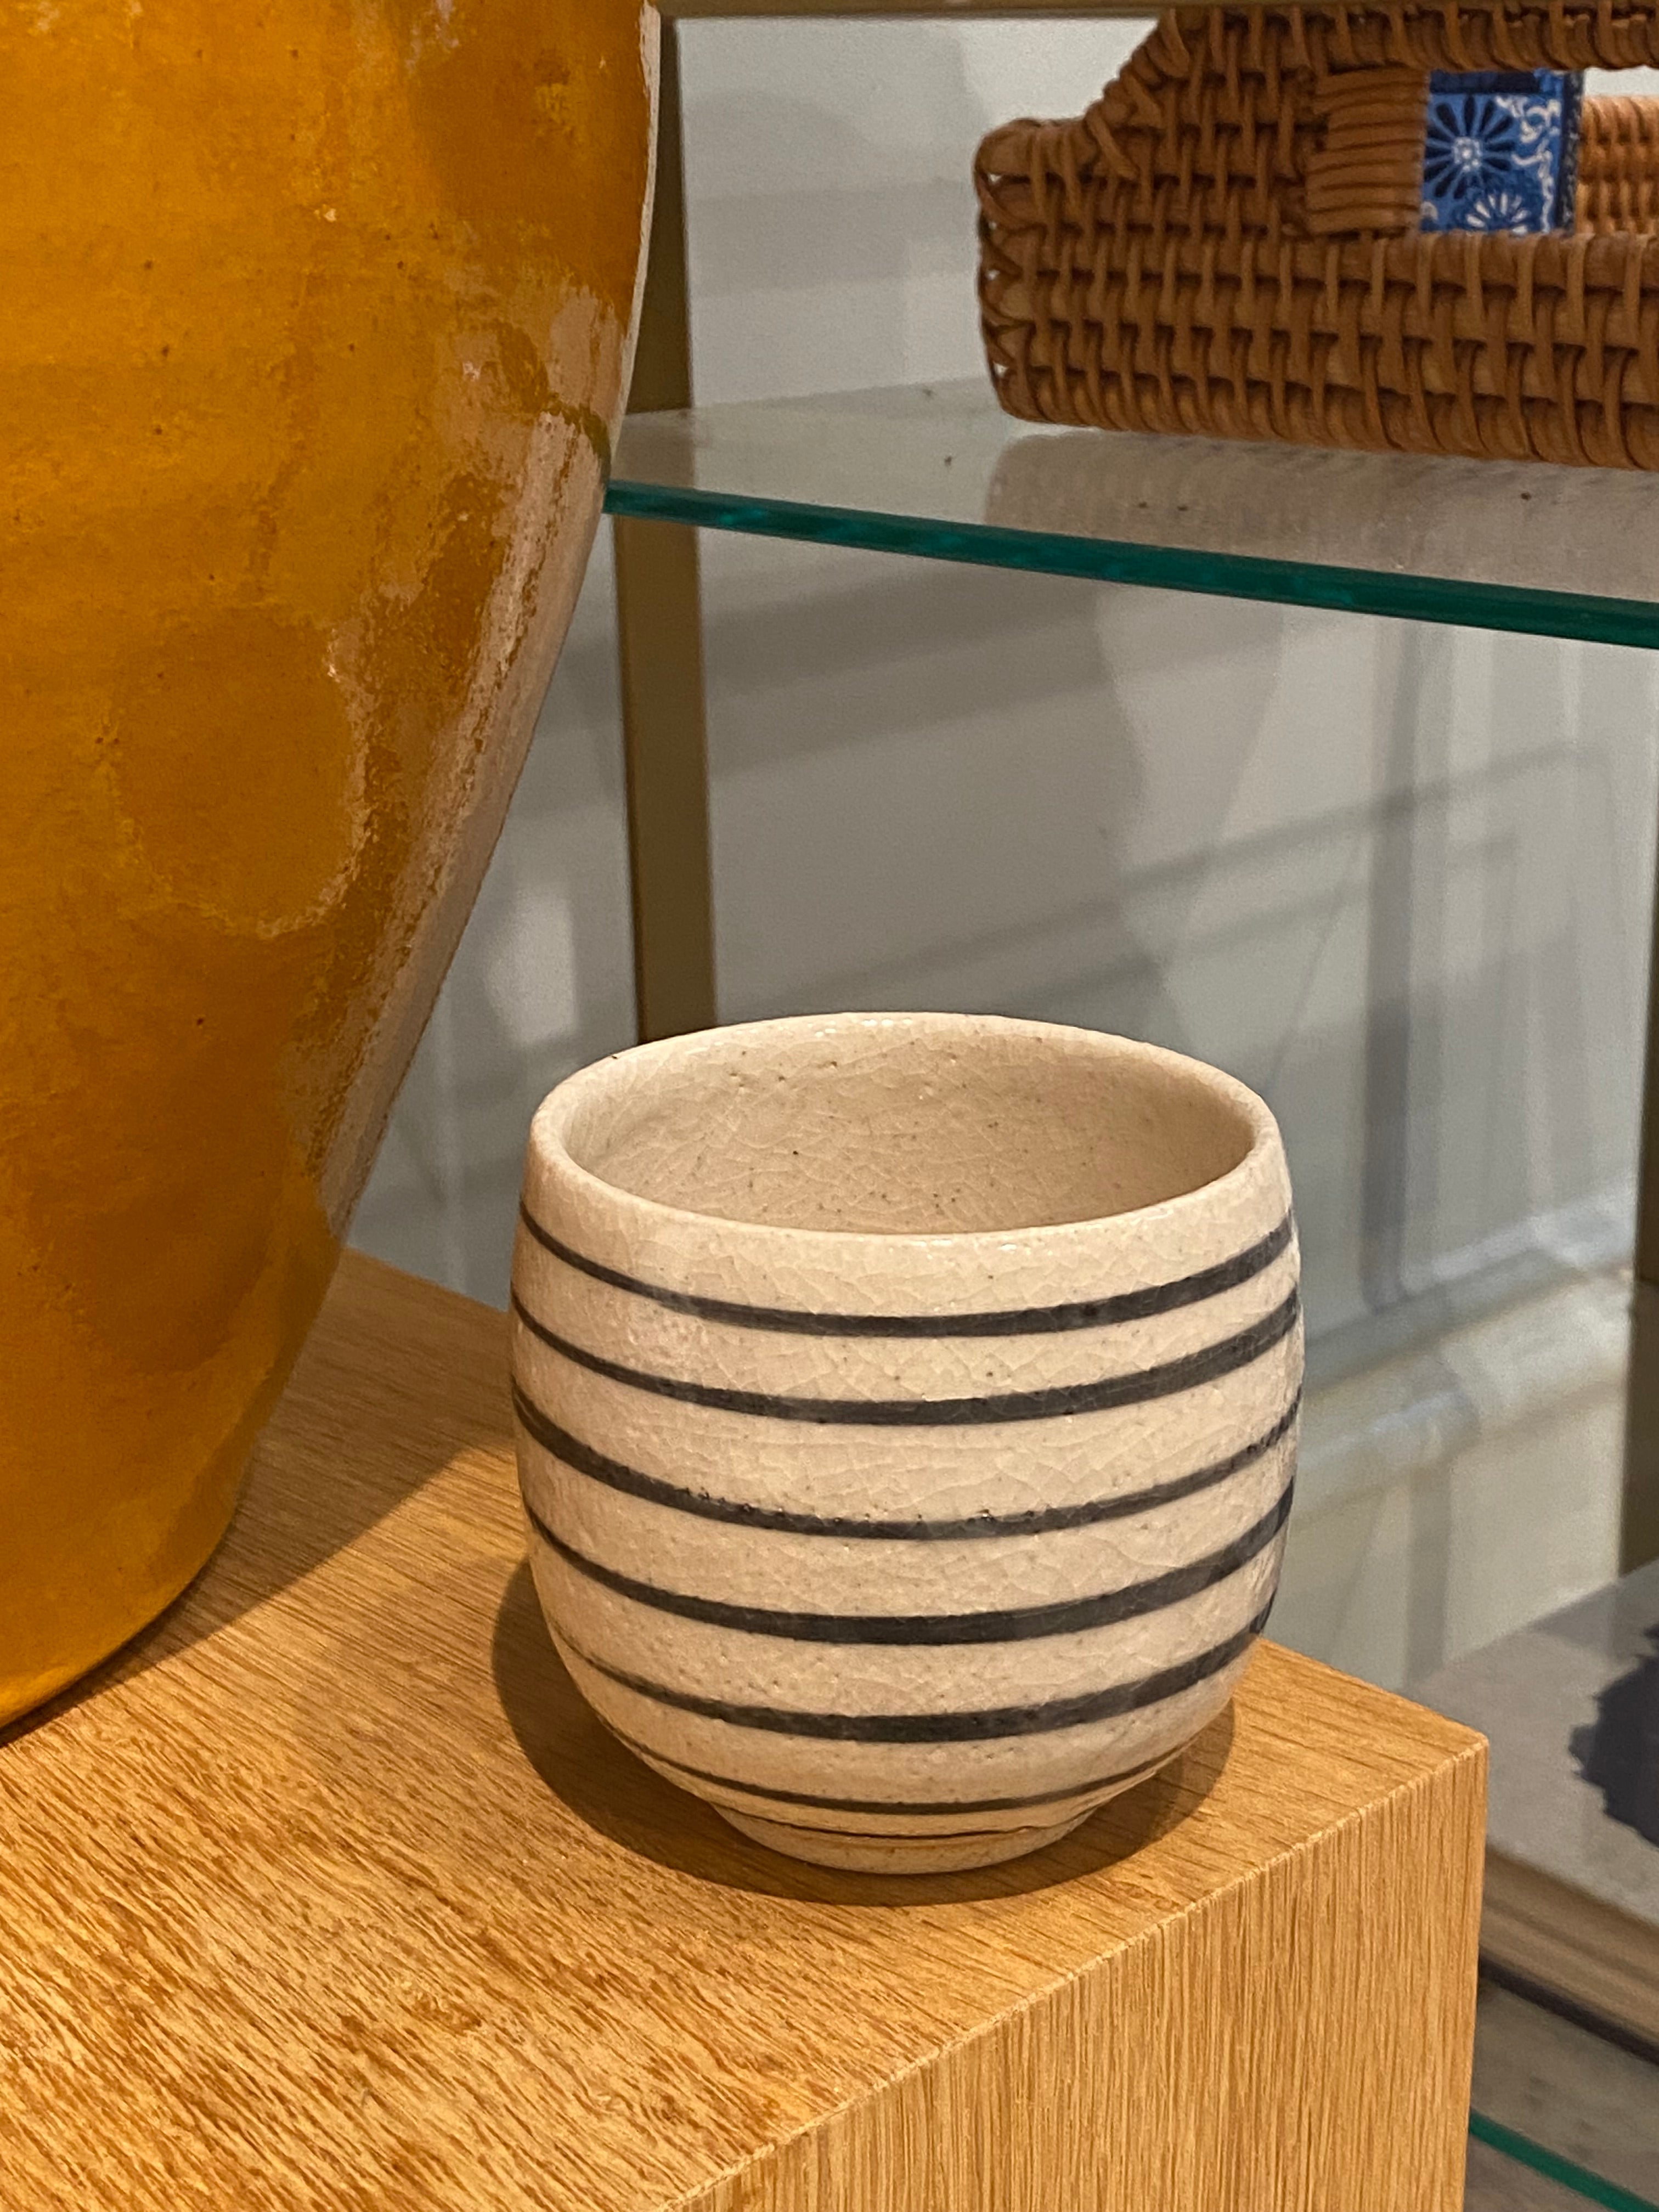 Japanese cup with white frosted glaze and black stripes